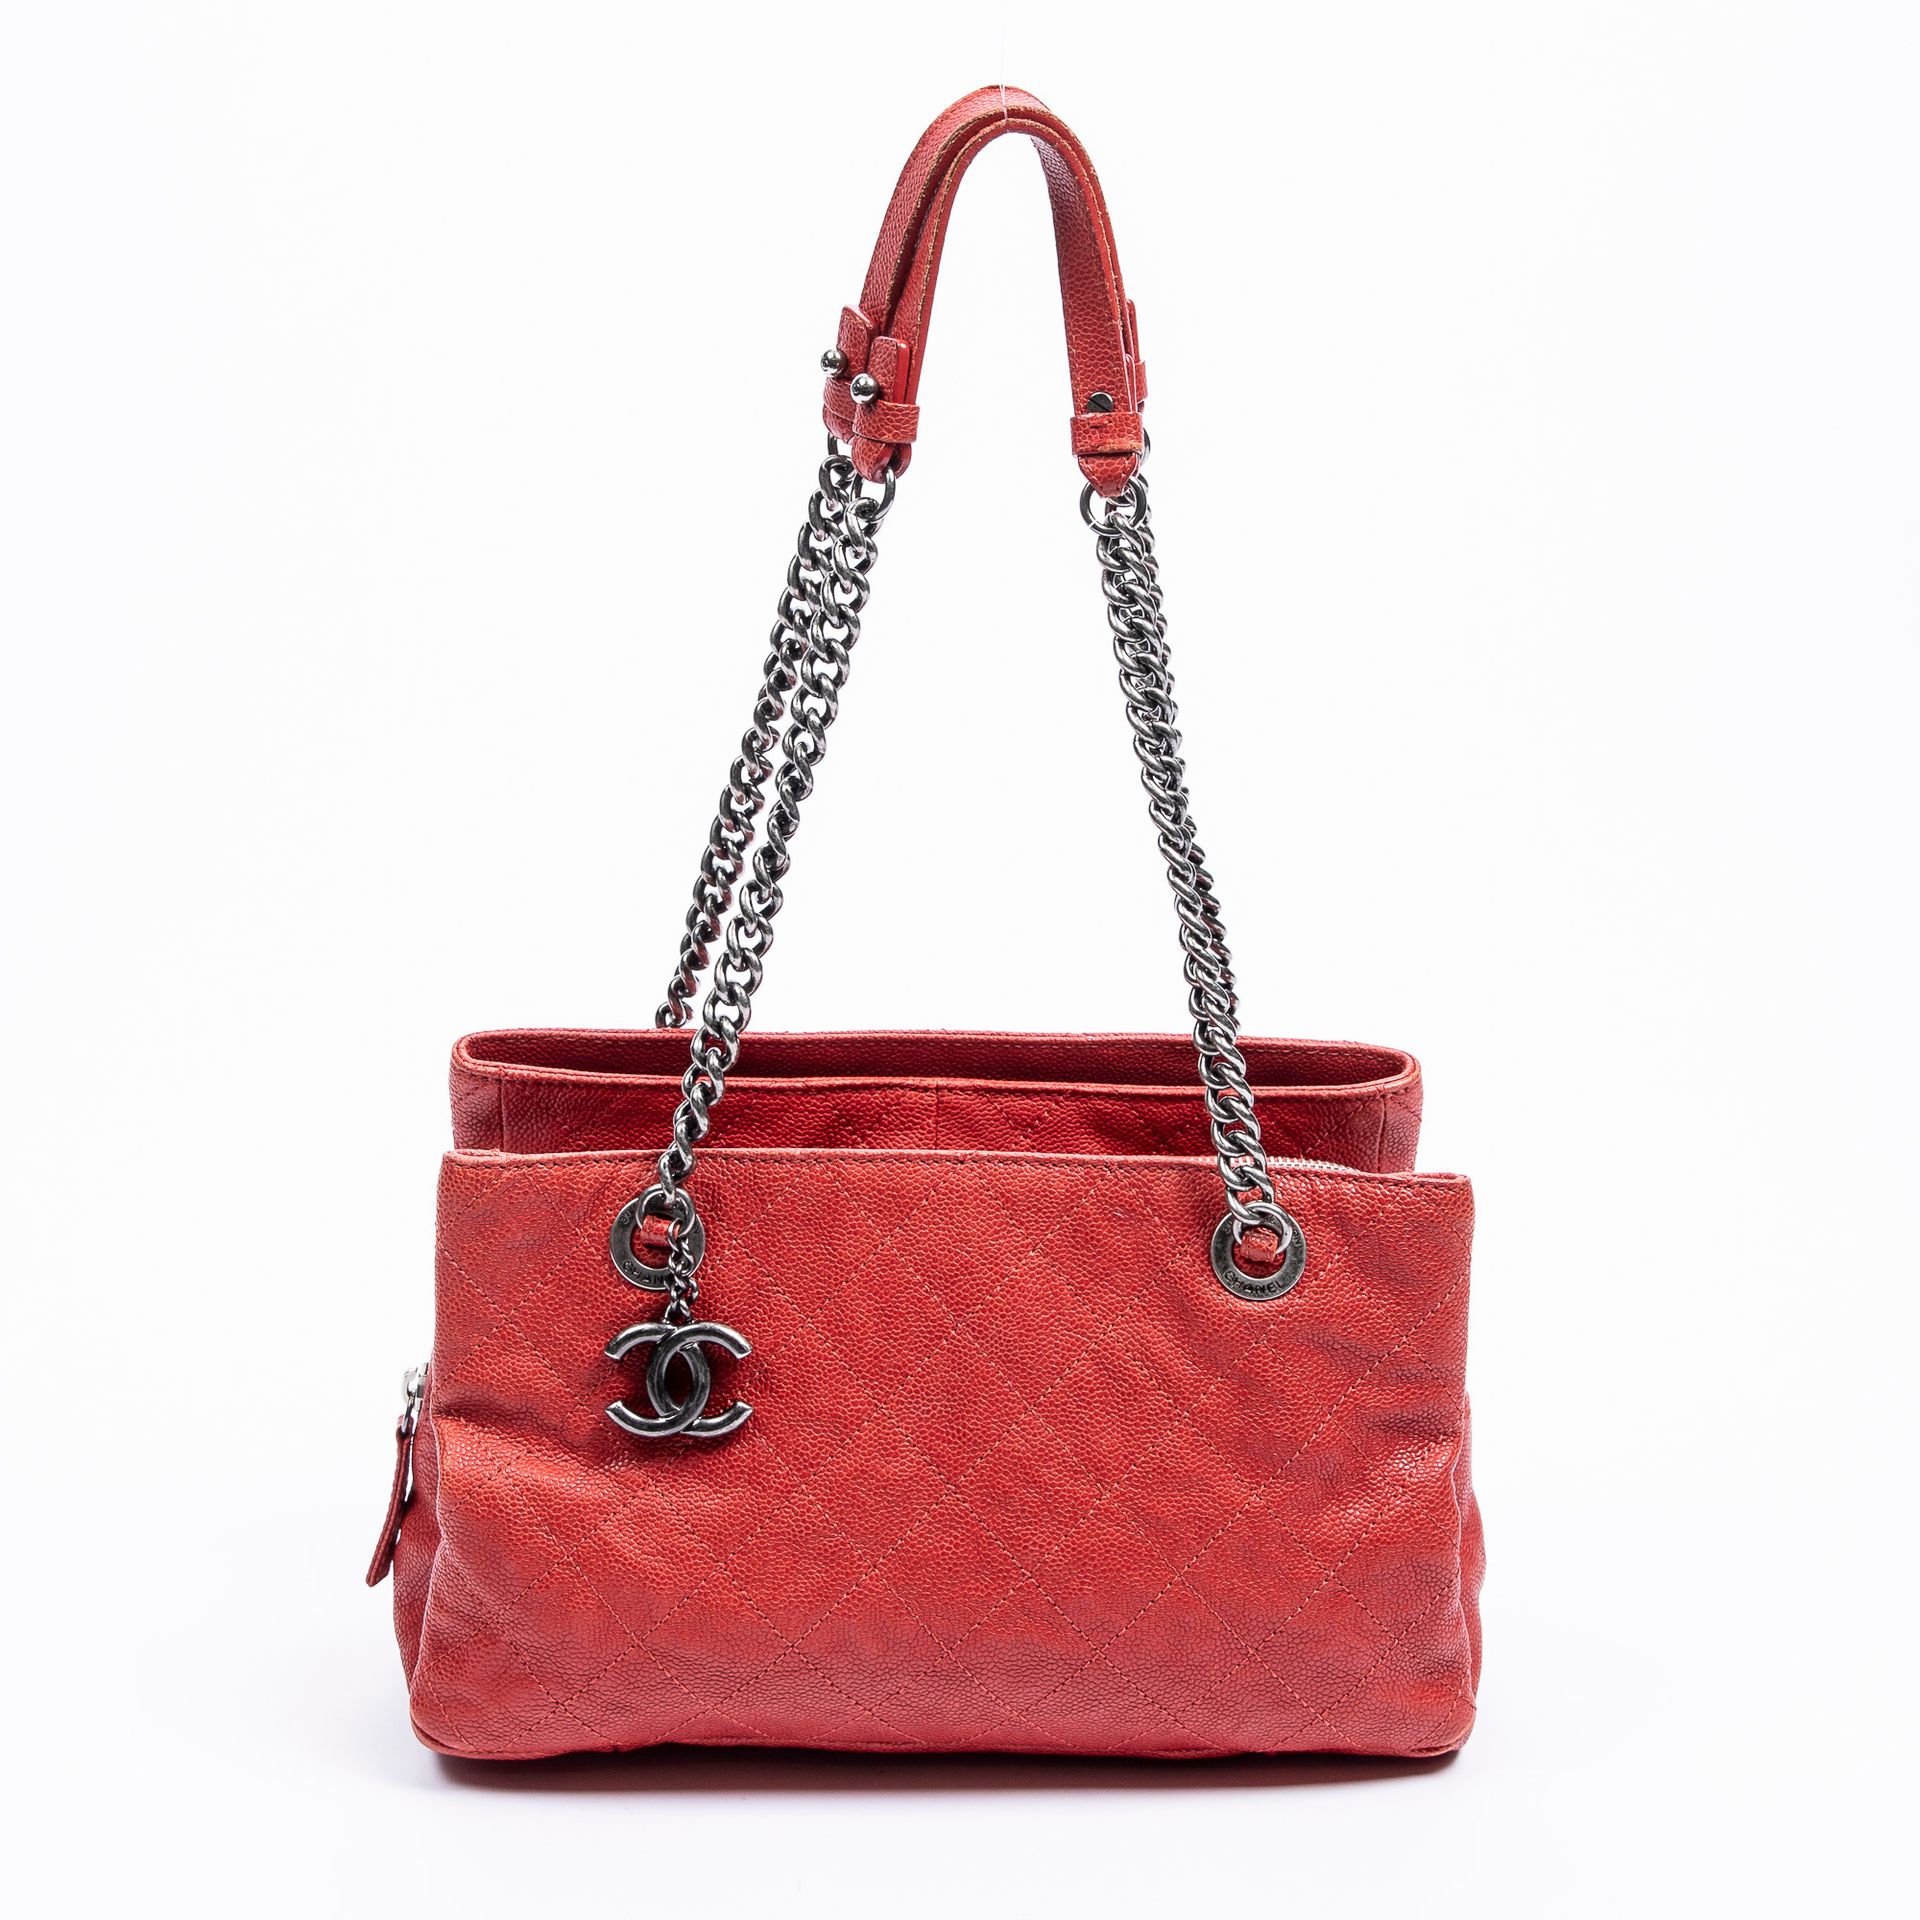 Chanel CHANEL - Small tote bag in red caviar calfskin - Beige fabric inside - Bl&hellip;